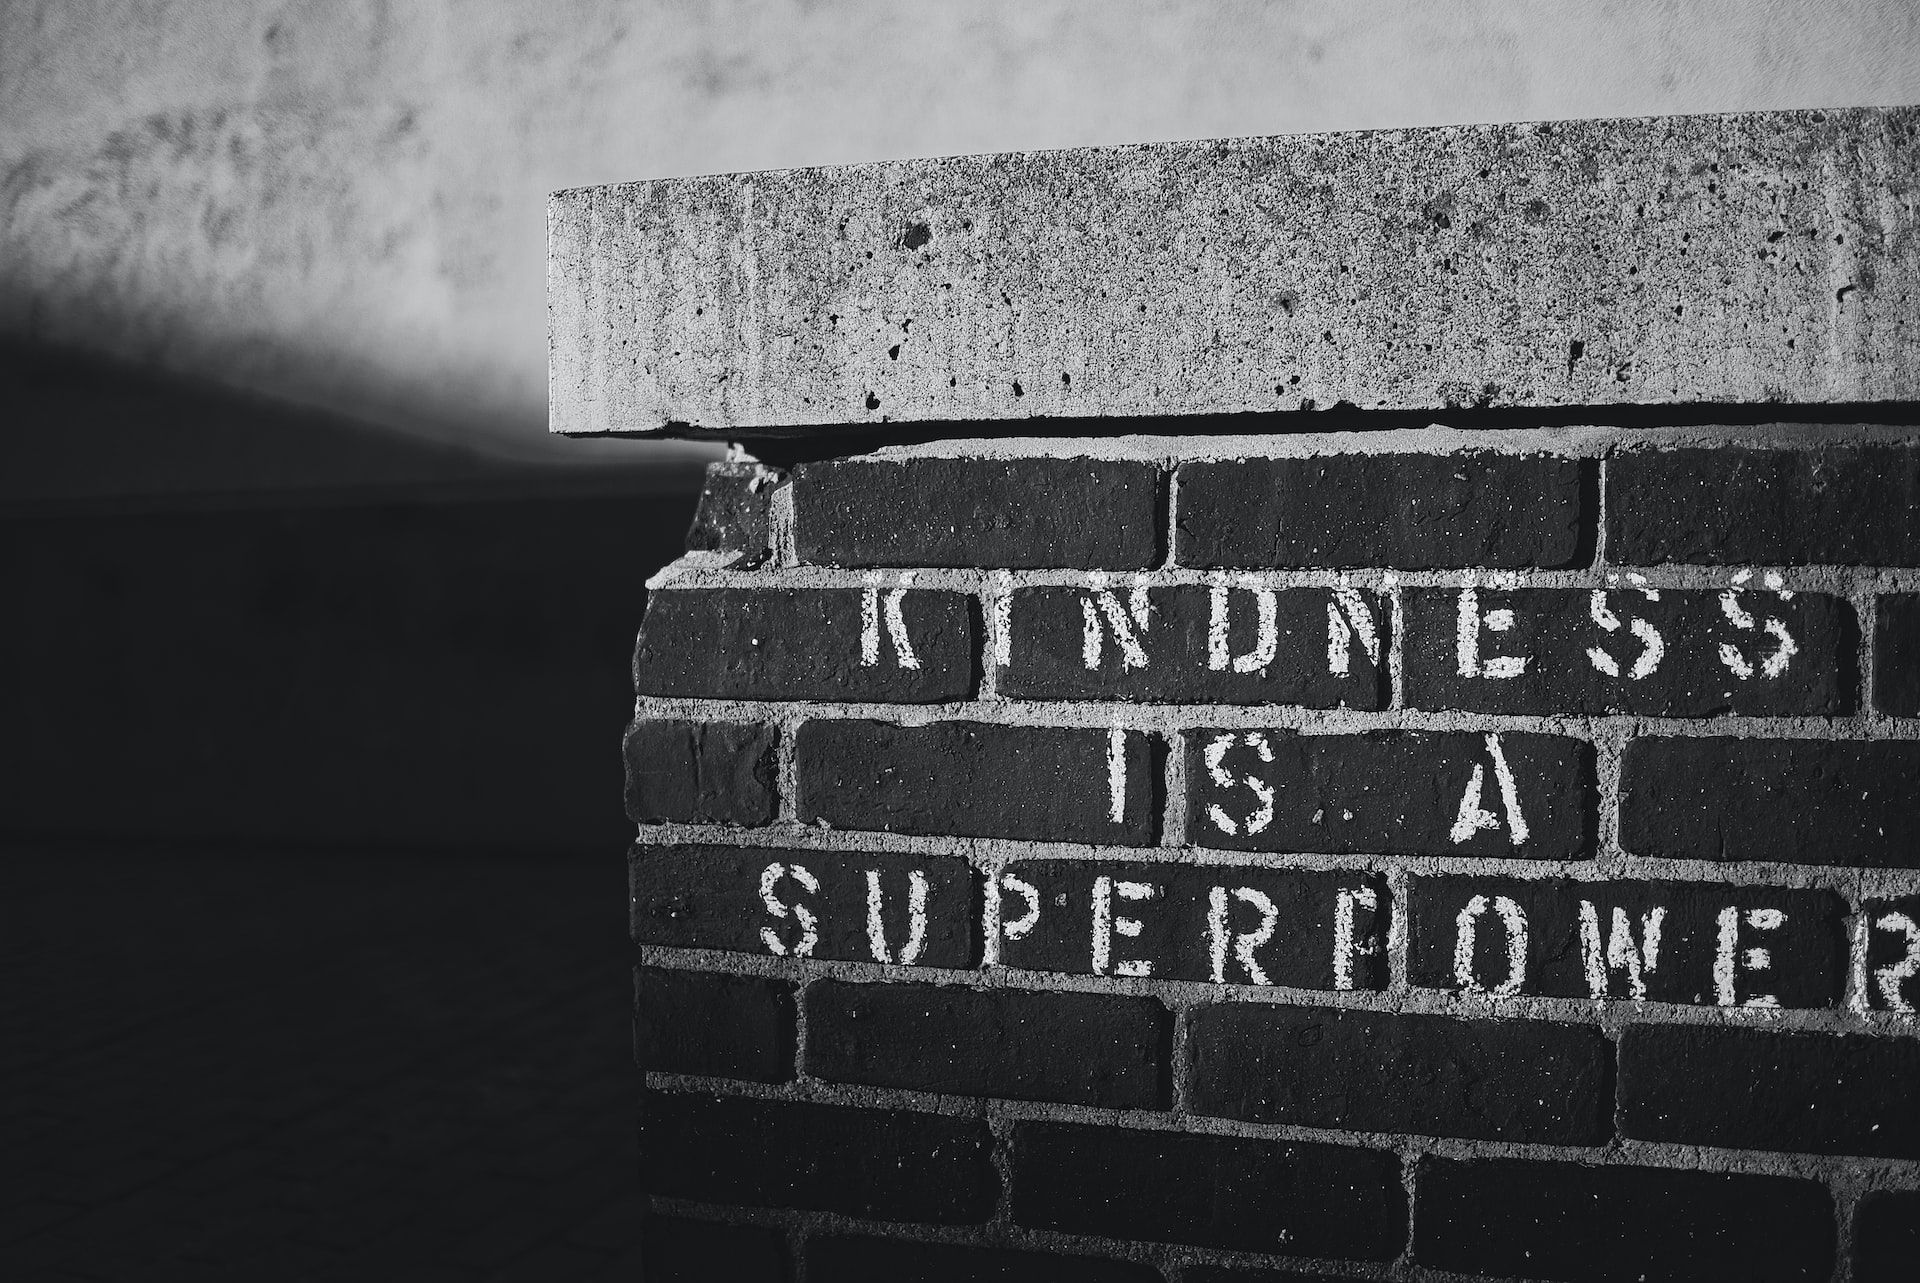 'Kindness is a superpowered' stenciled on a brick wall